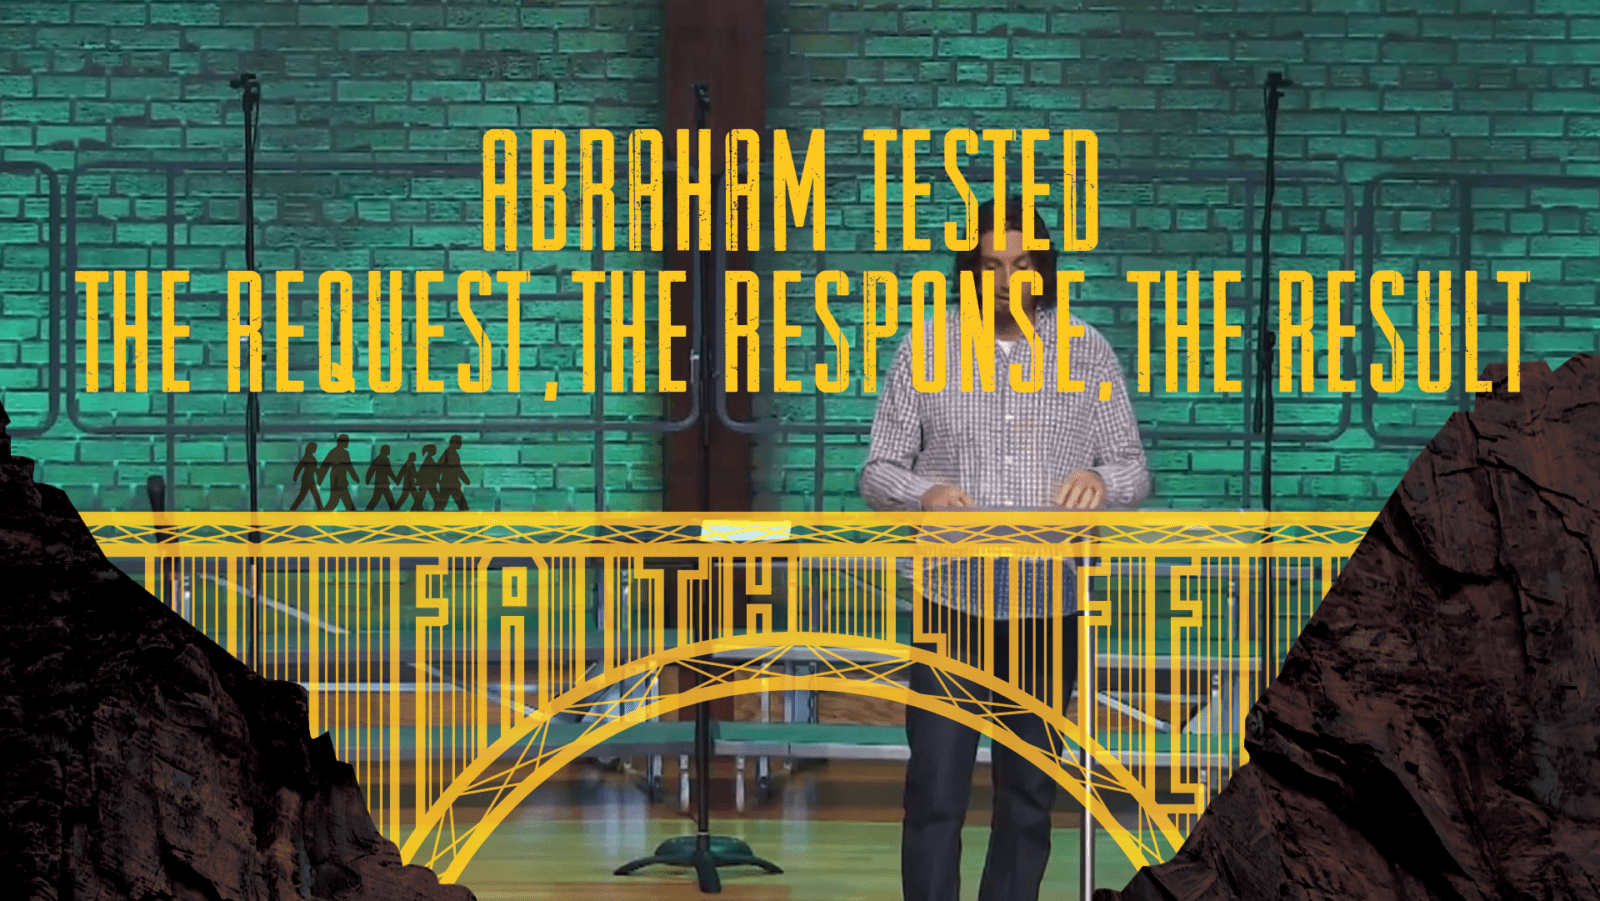 Abraham Tested: The Request, The Response, The Result